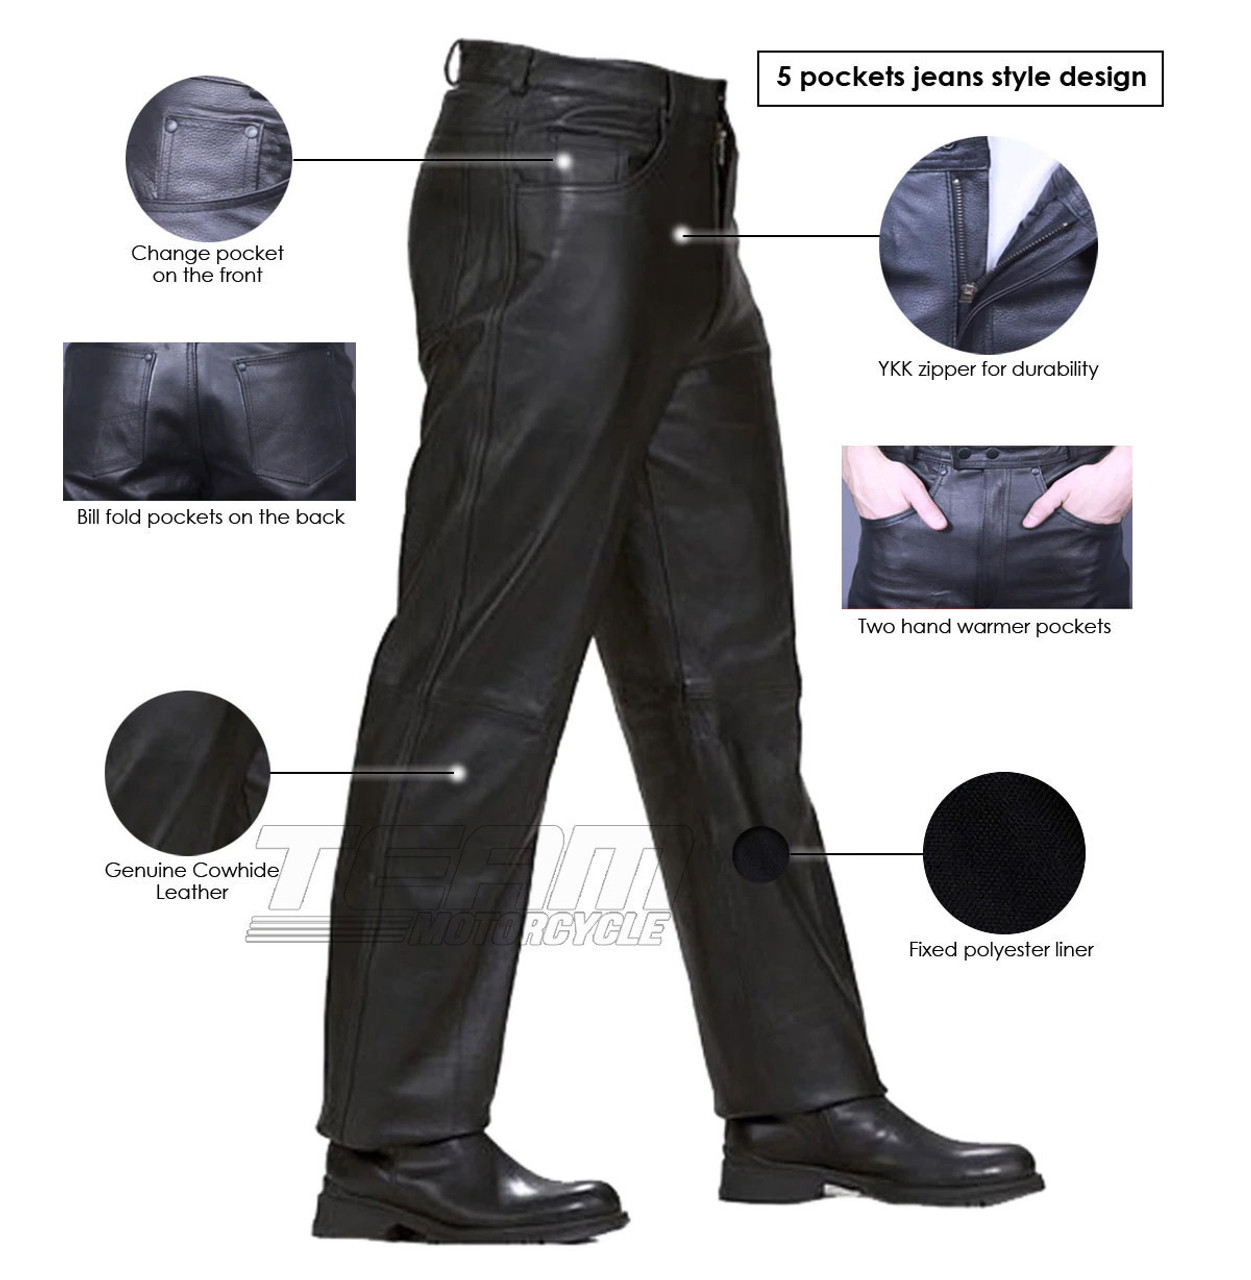 Where can I find men's leather pants? - Quora